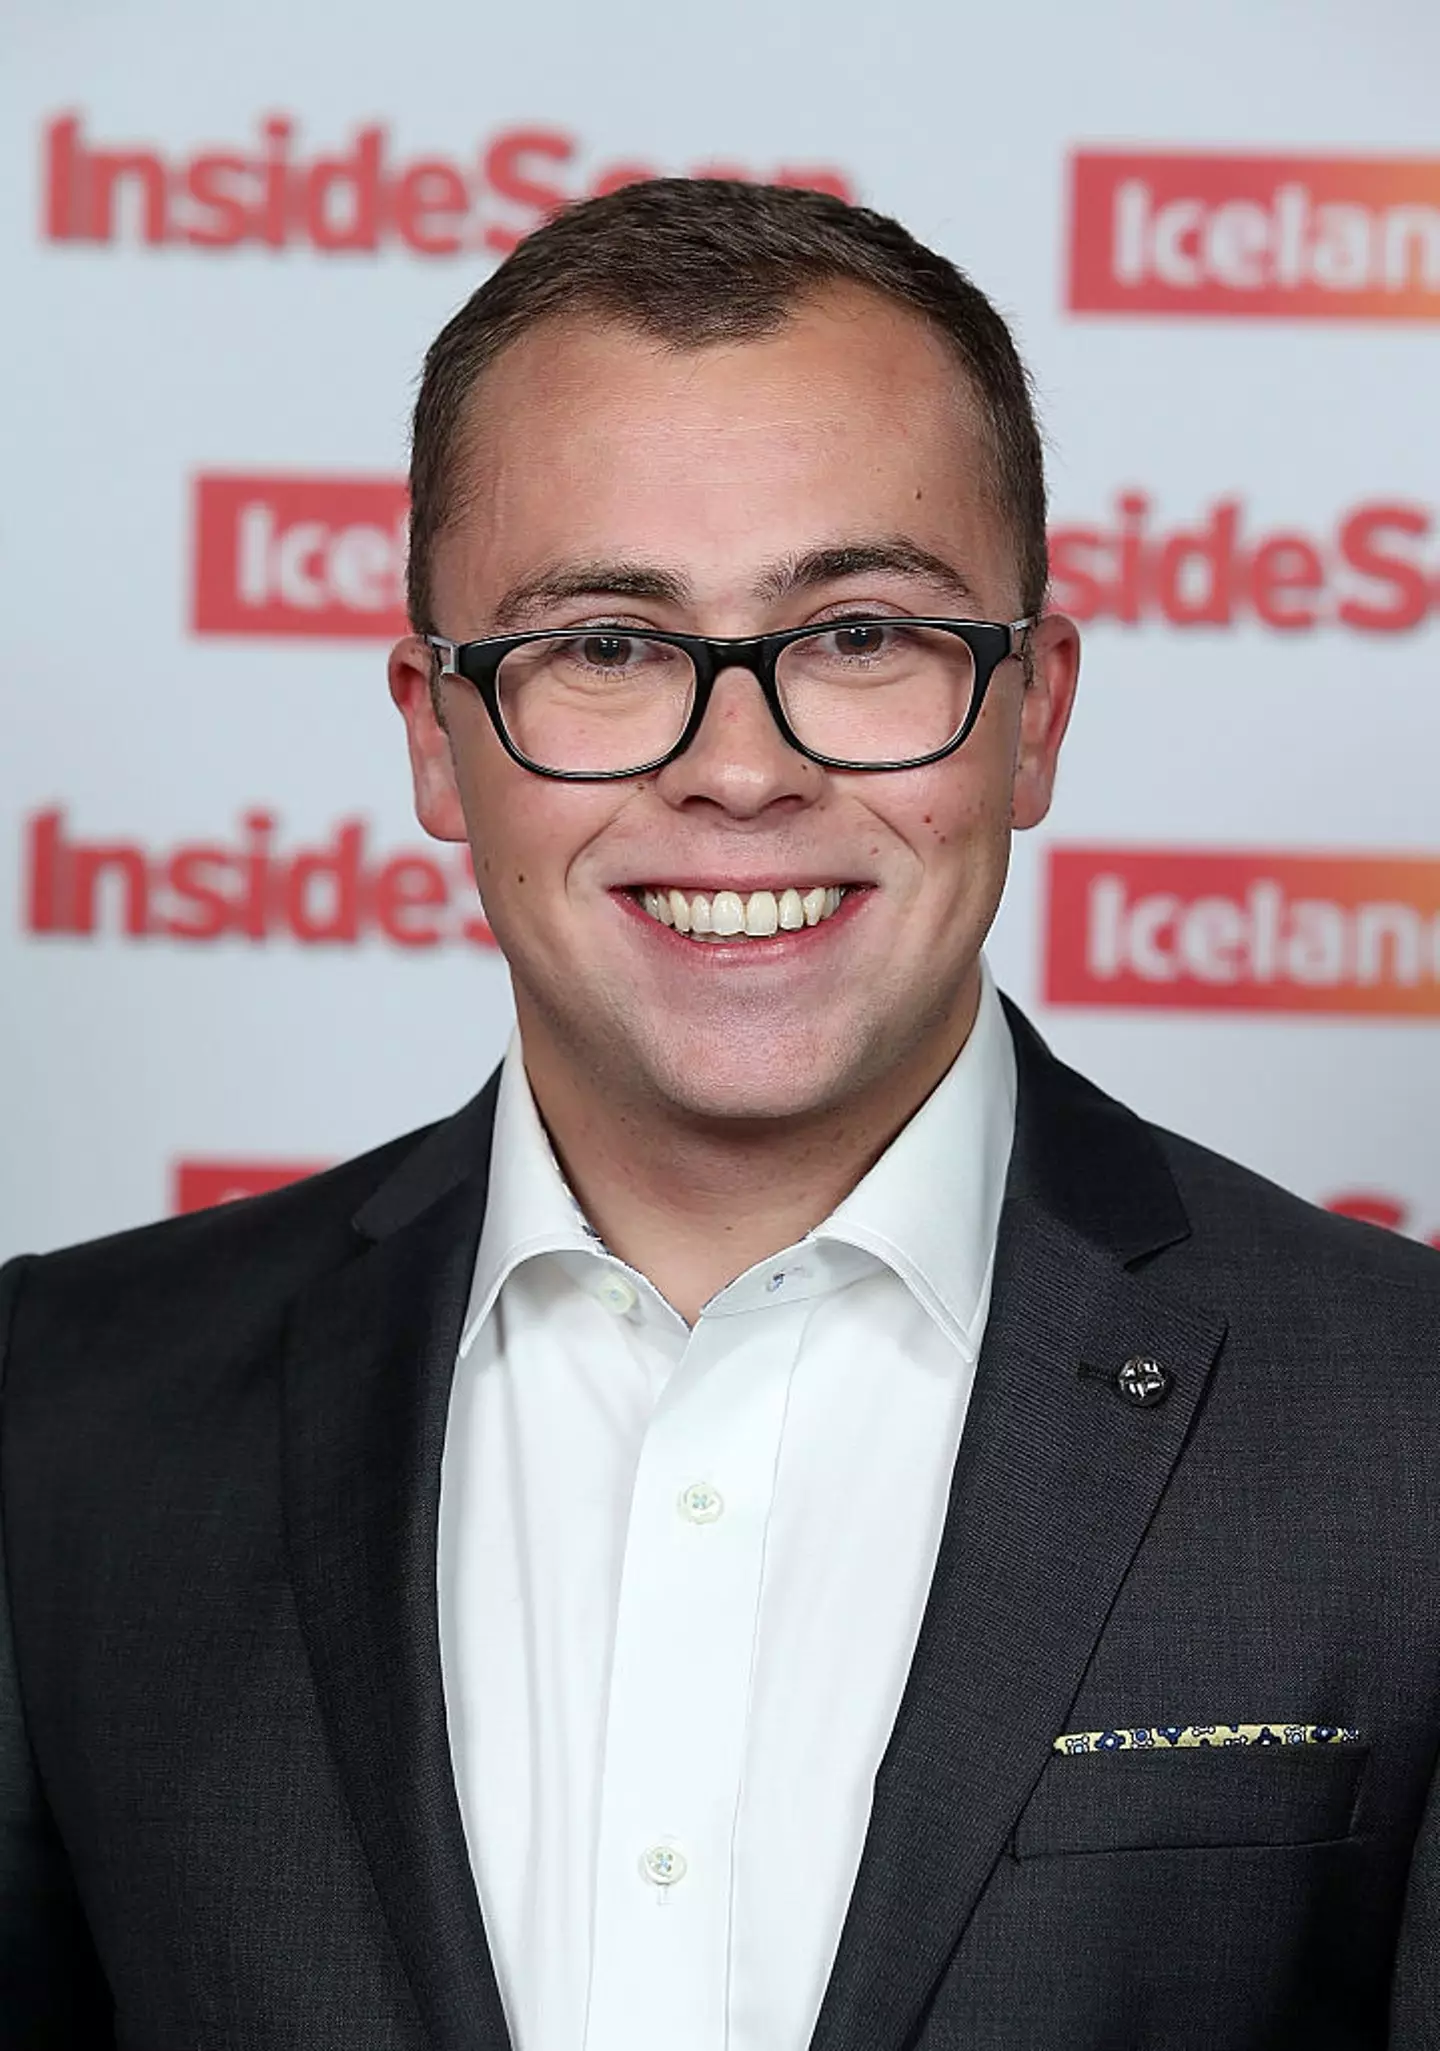 Joe Tracini has opened up about living with Borderline Personality Disorder. (Mike Marsland/WireImage)